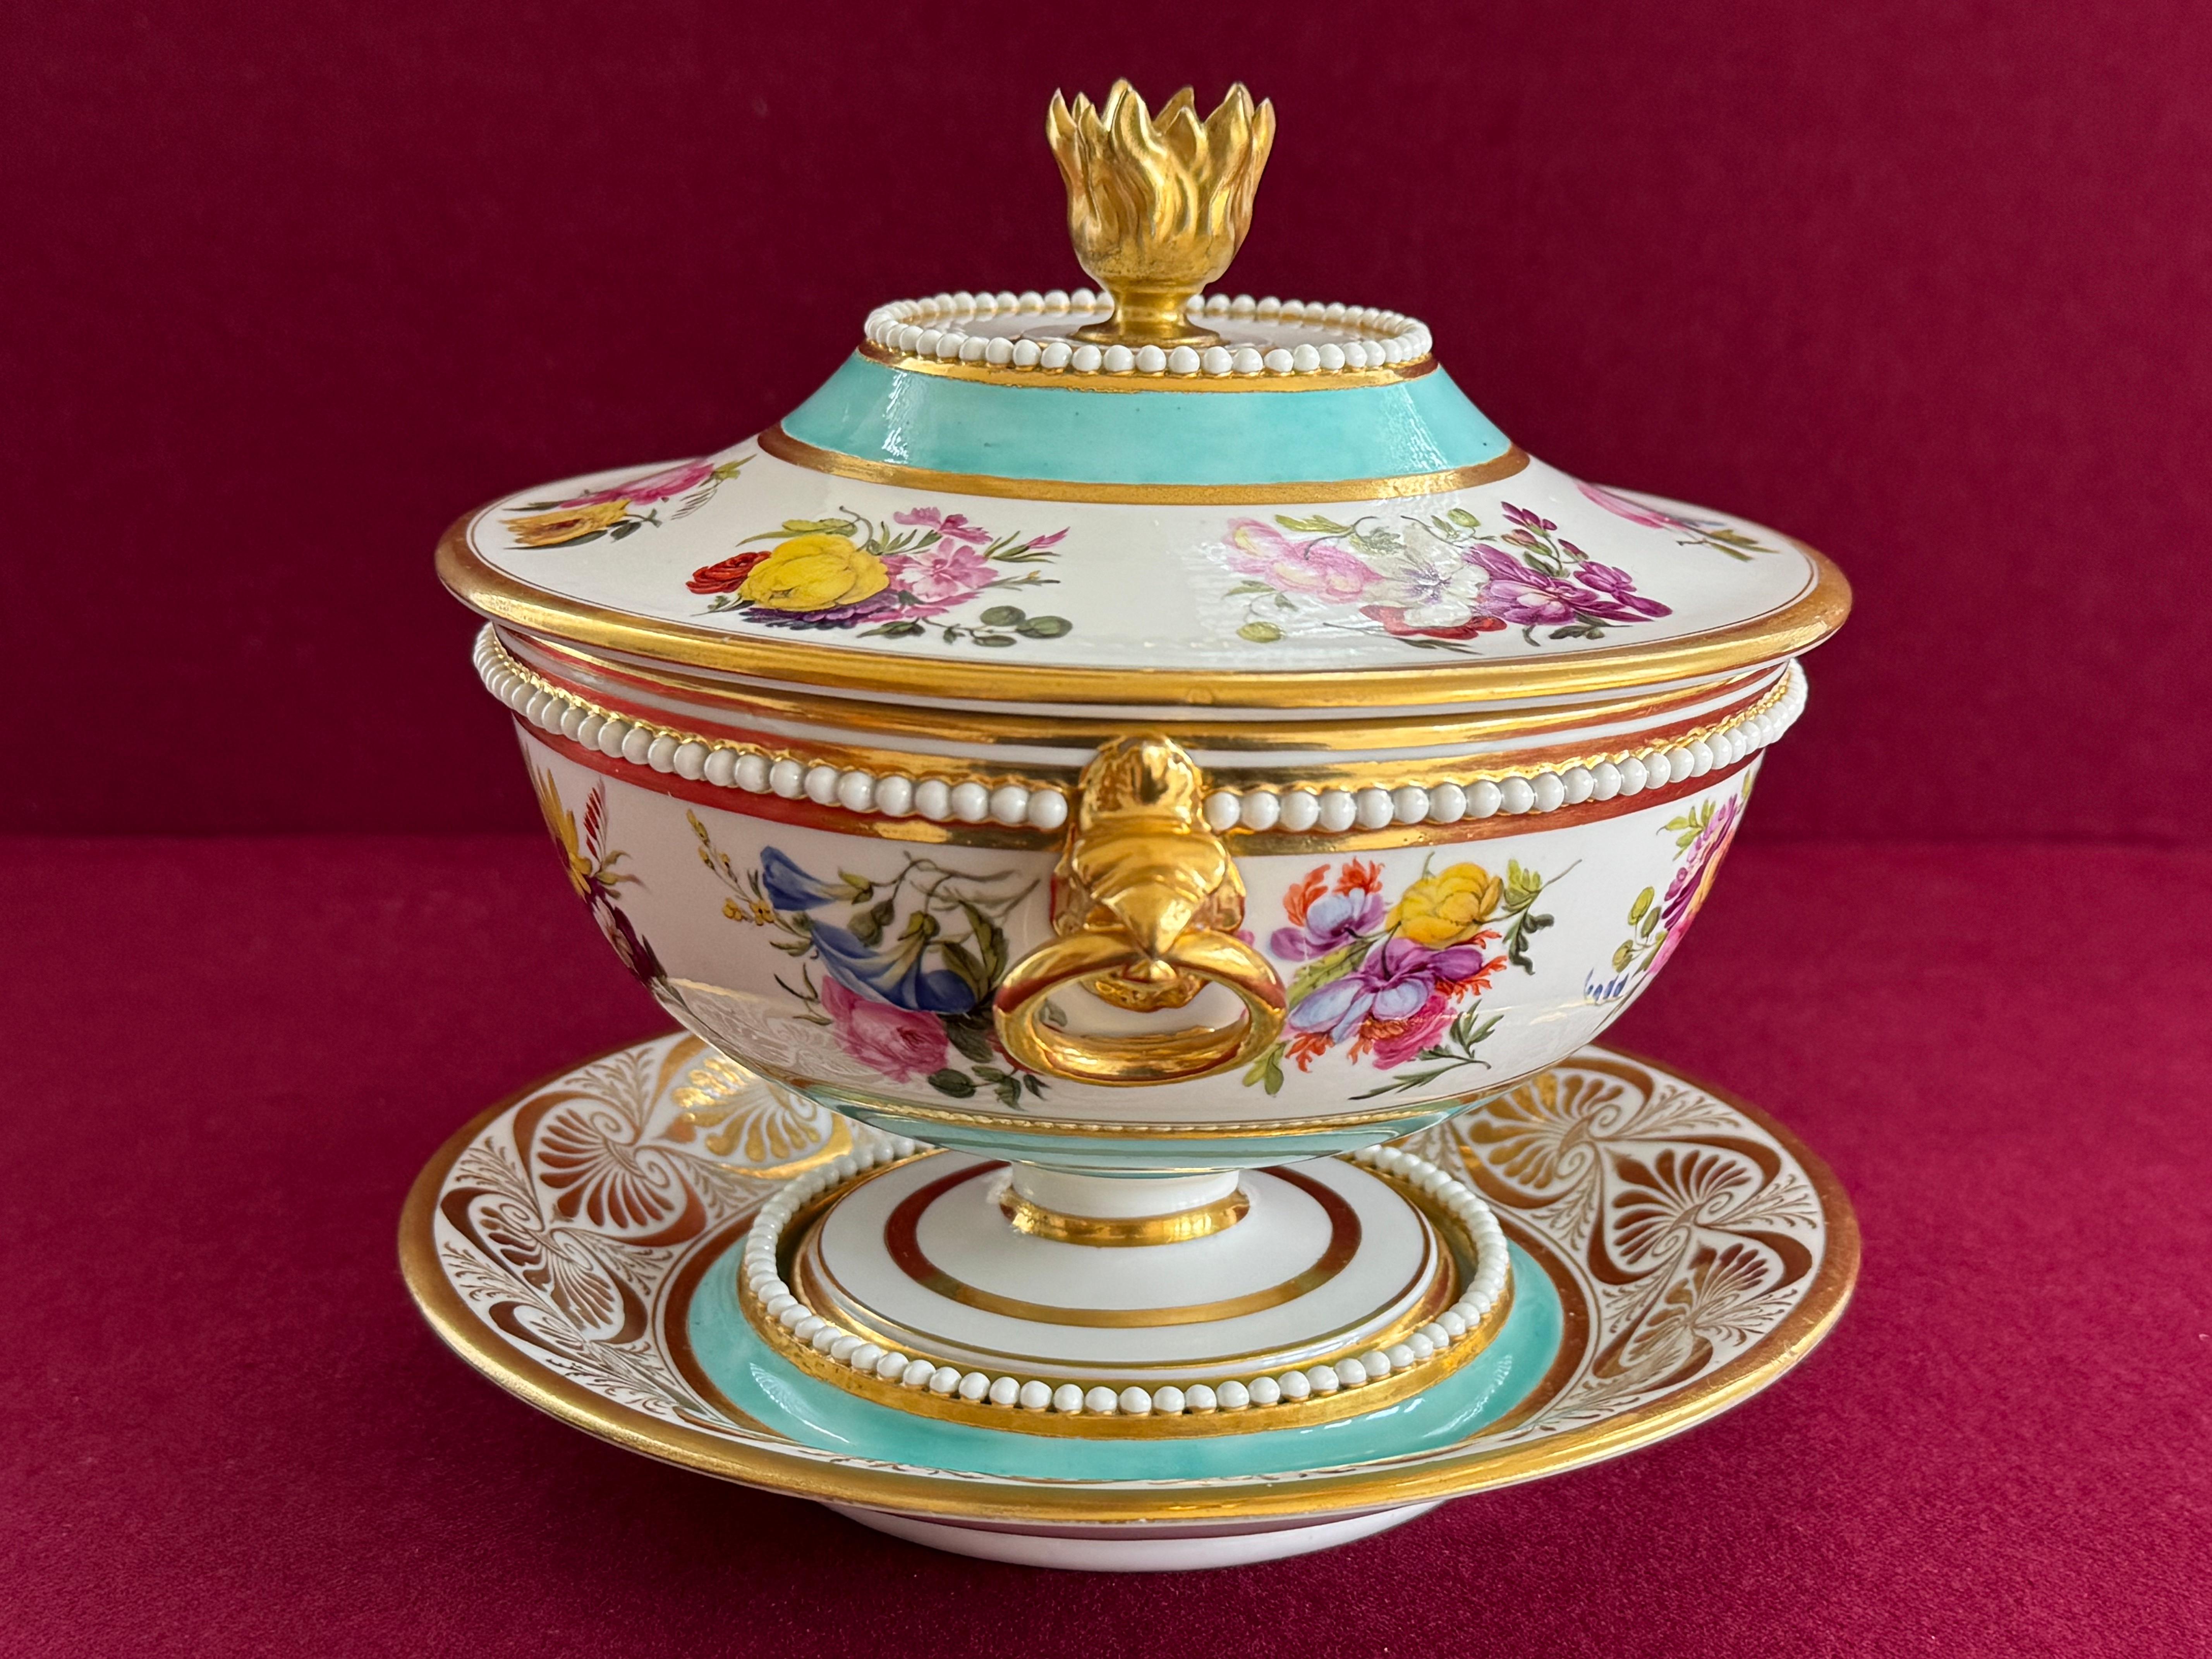 Hand-Painted A Barr, Flight & Barr Worcester Porcelain Tureen and Stand c.1804-1807